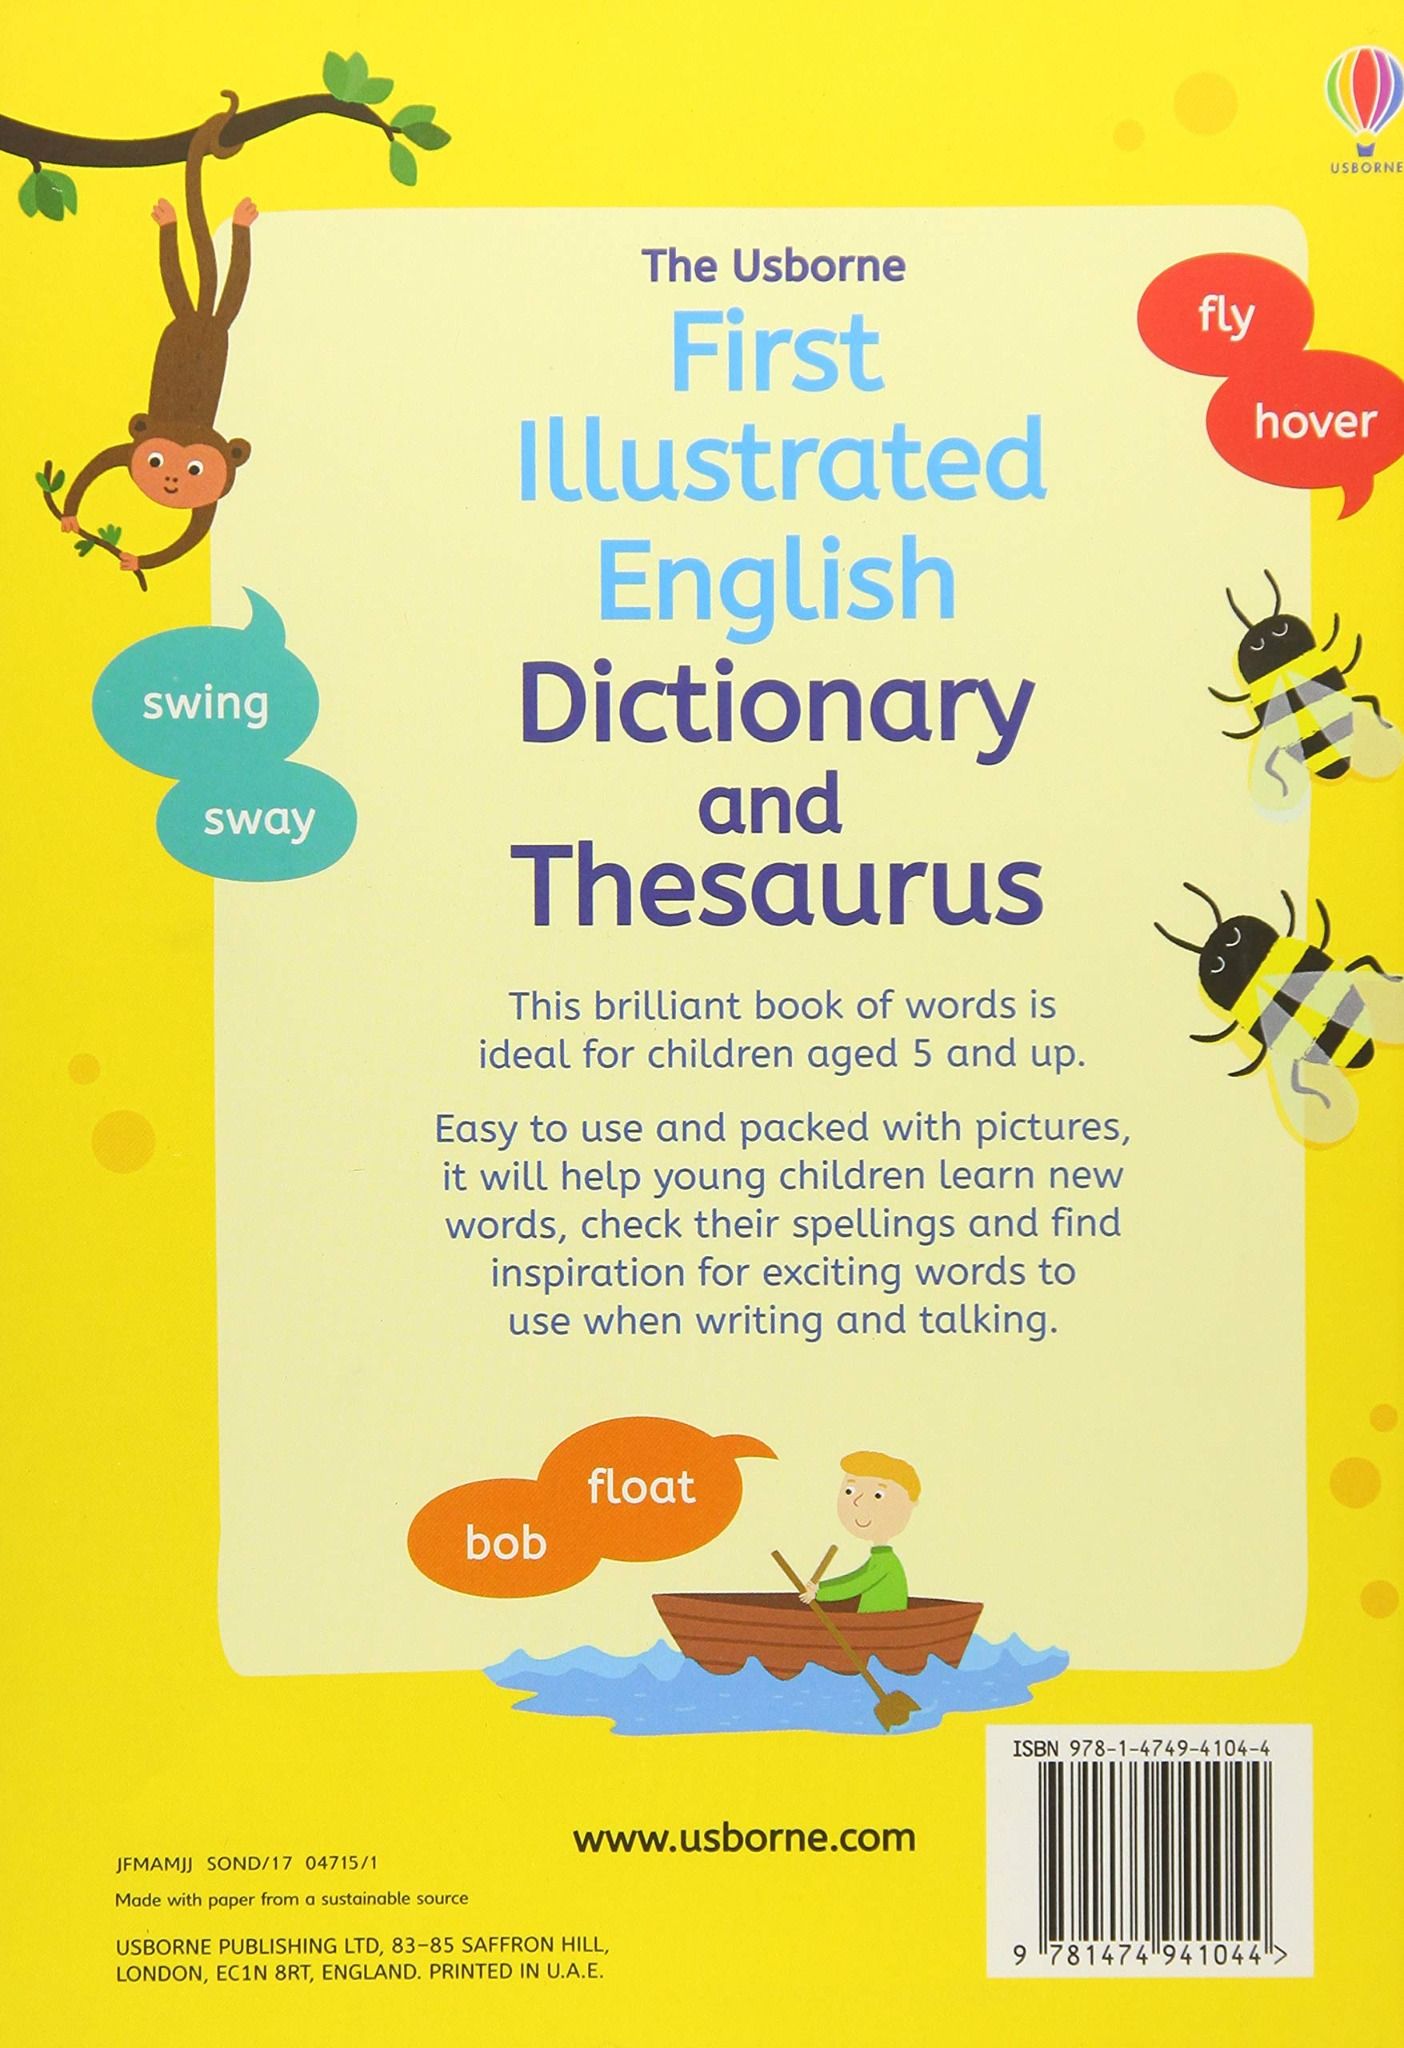  The usborne first illustrated english dictionary and thesaurus 